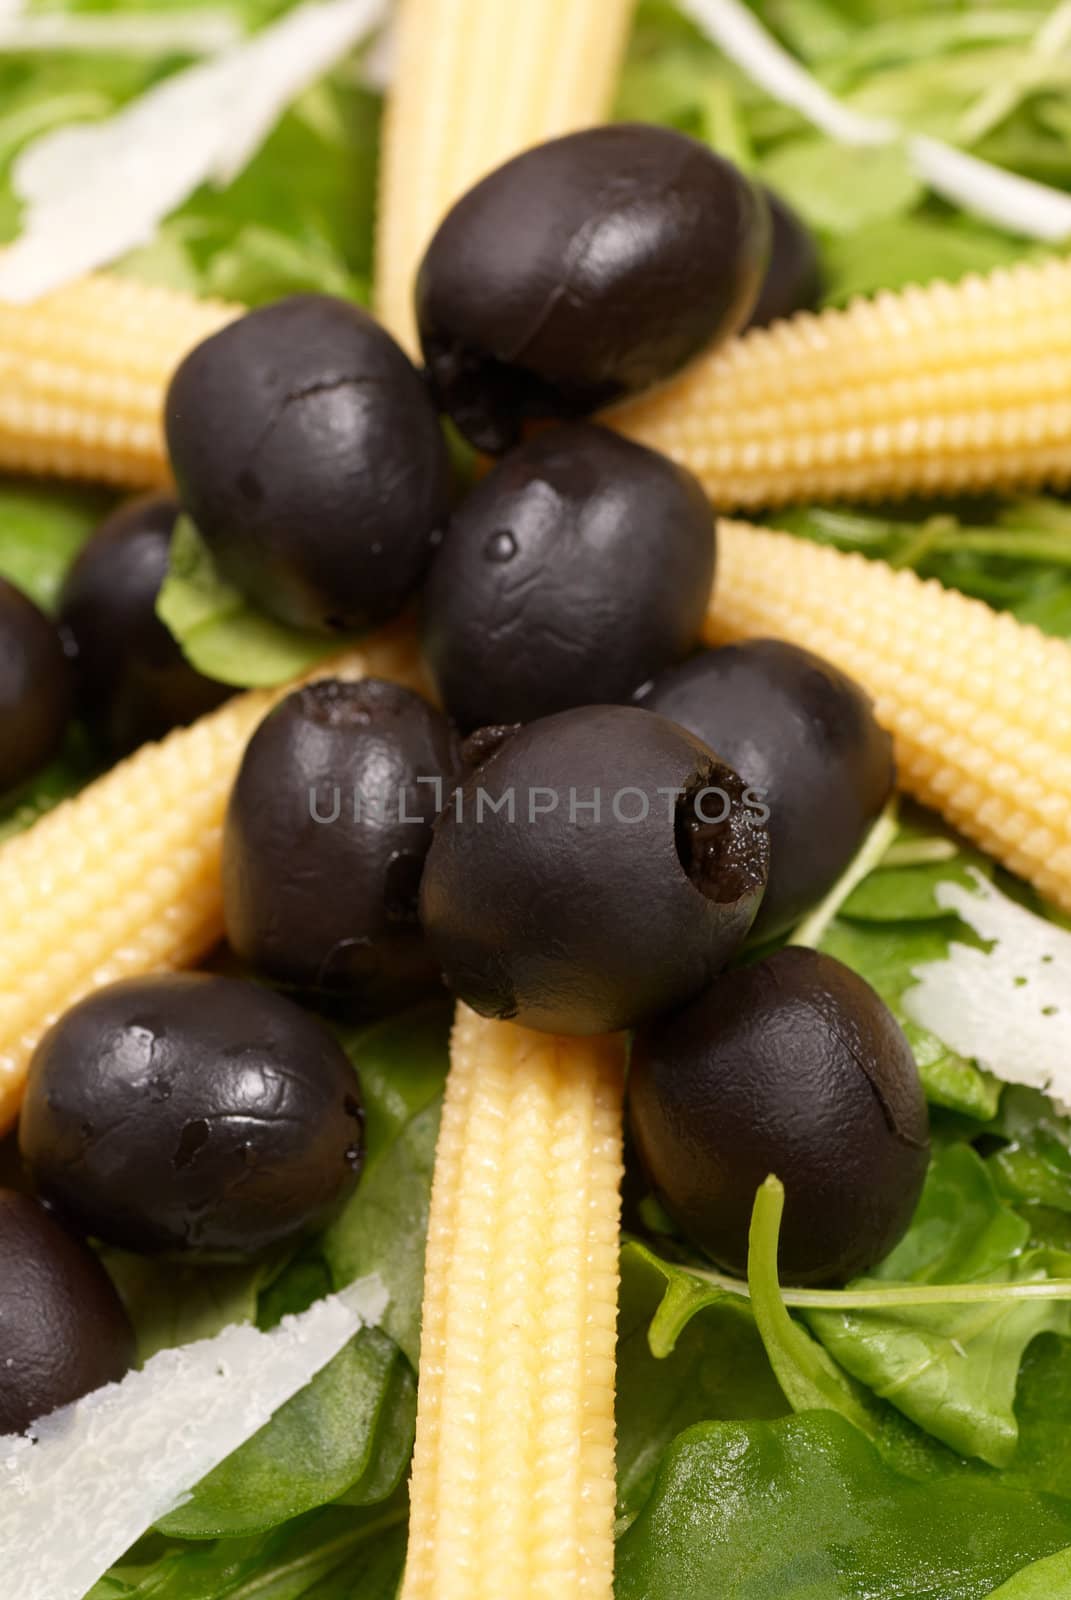 Baby corn salad with rocket and black olives